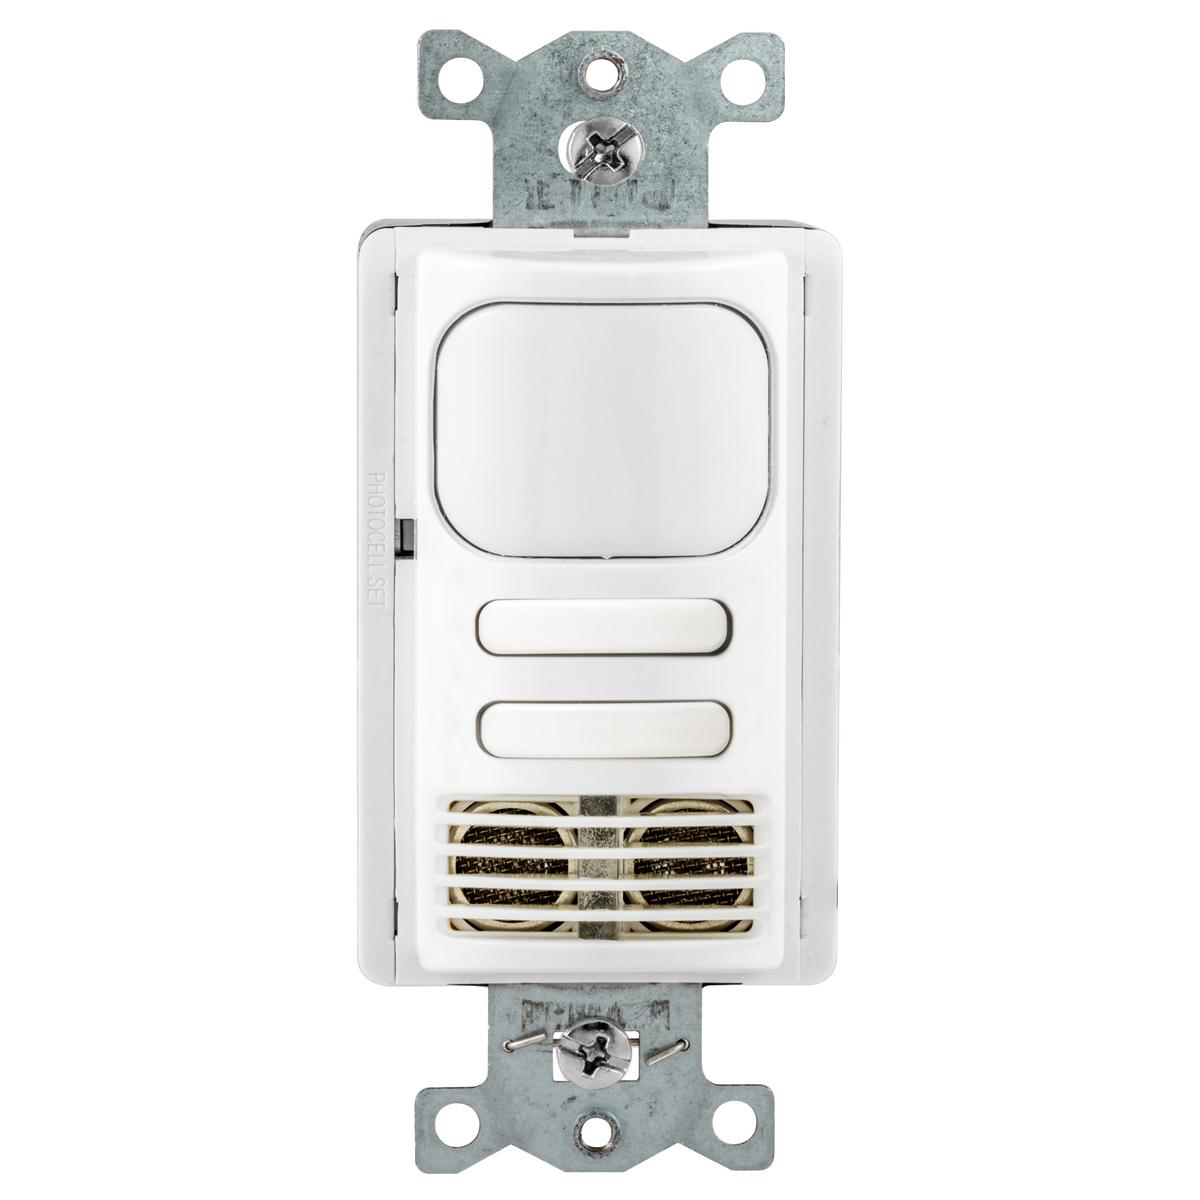 Hubbell AD2001W22 Vacancy Sensors, Wall Switch, AdaptiveDual Technology, 2 Circuit, 120/277V AC, White 